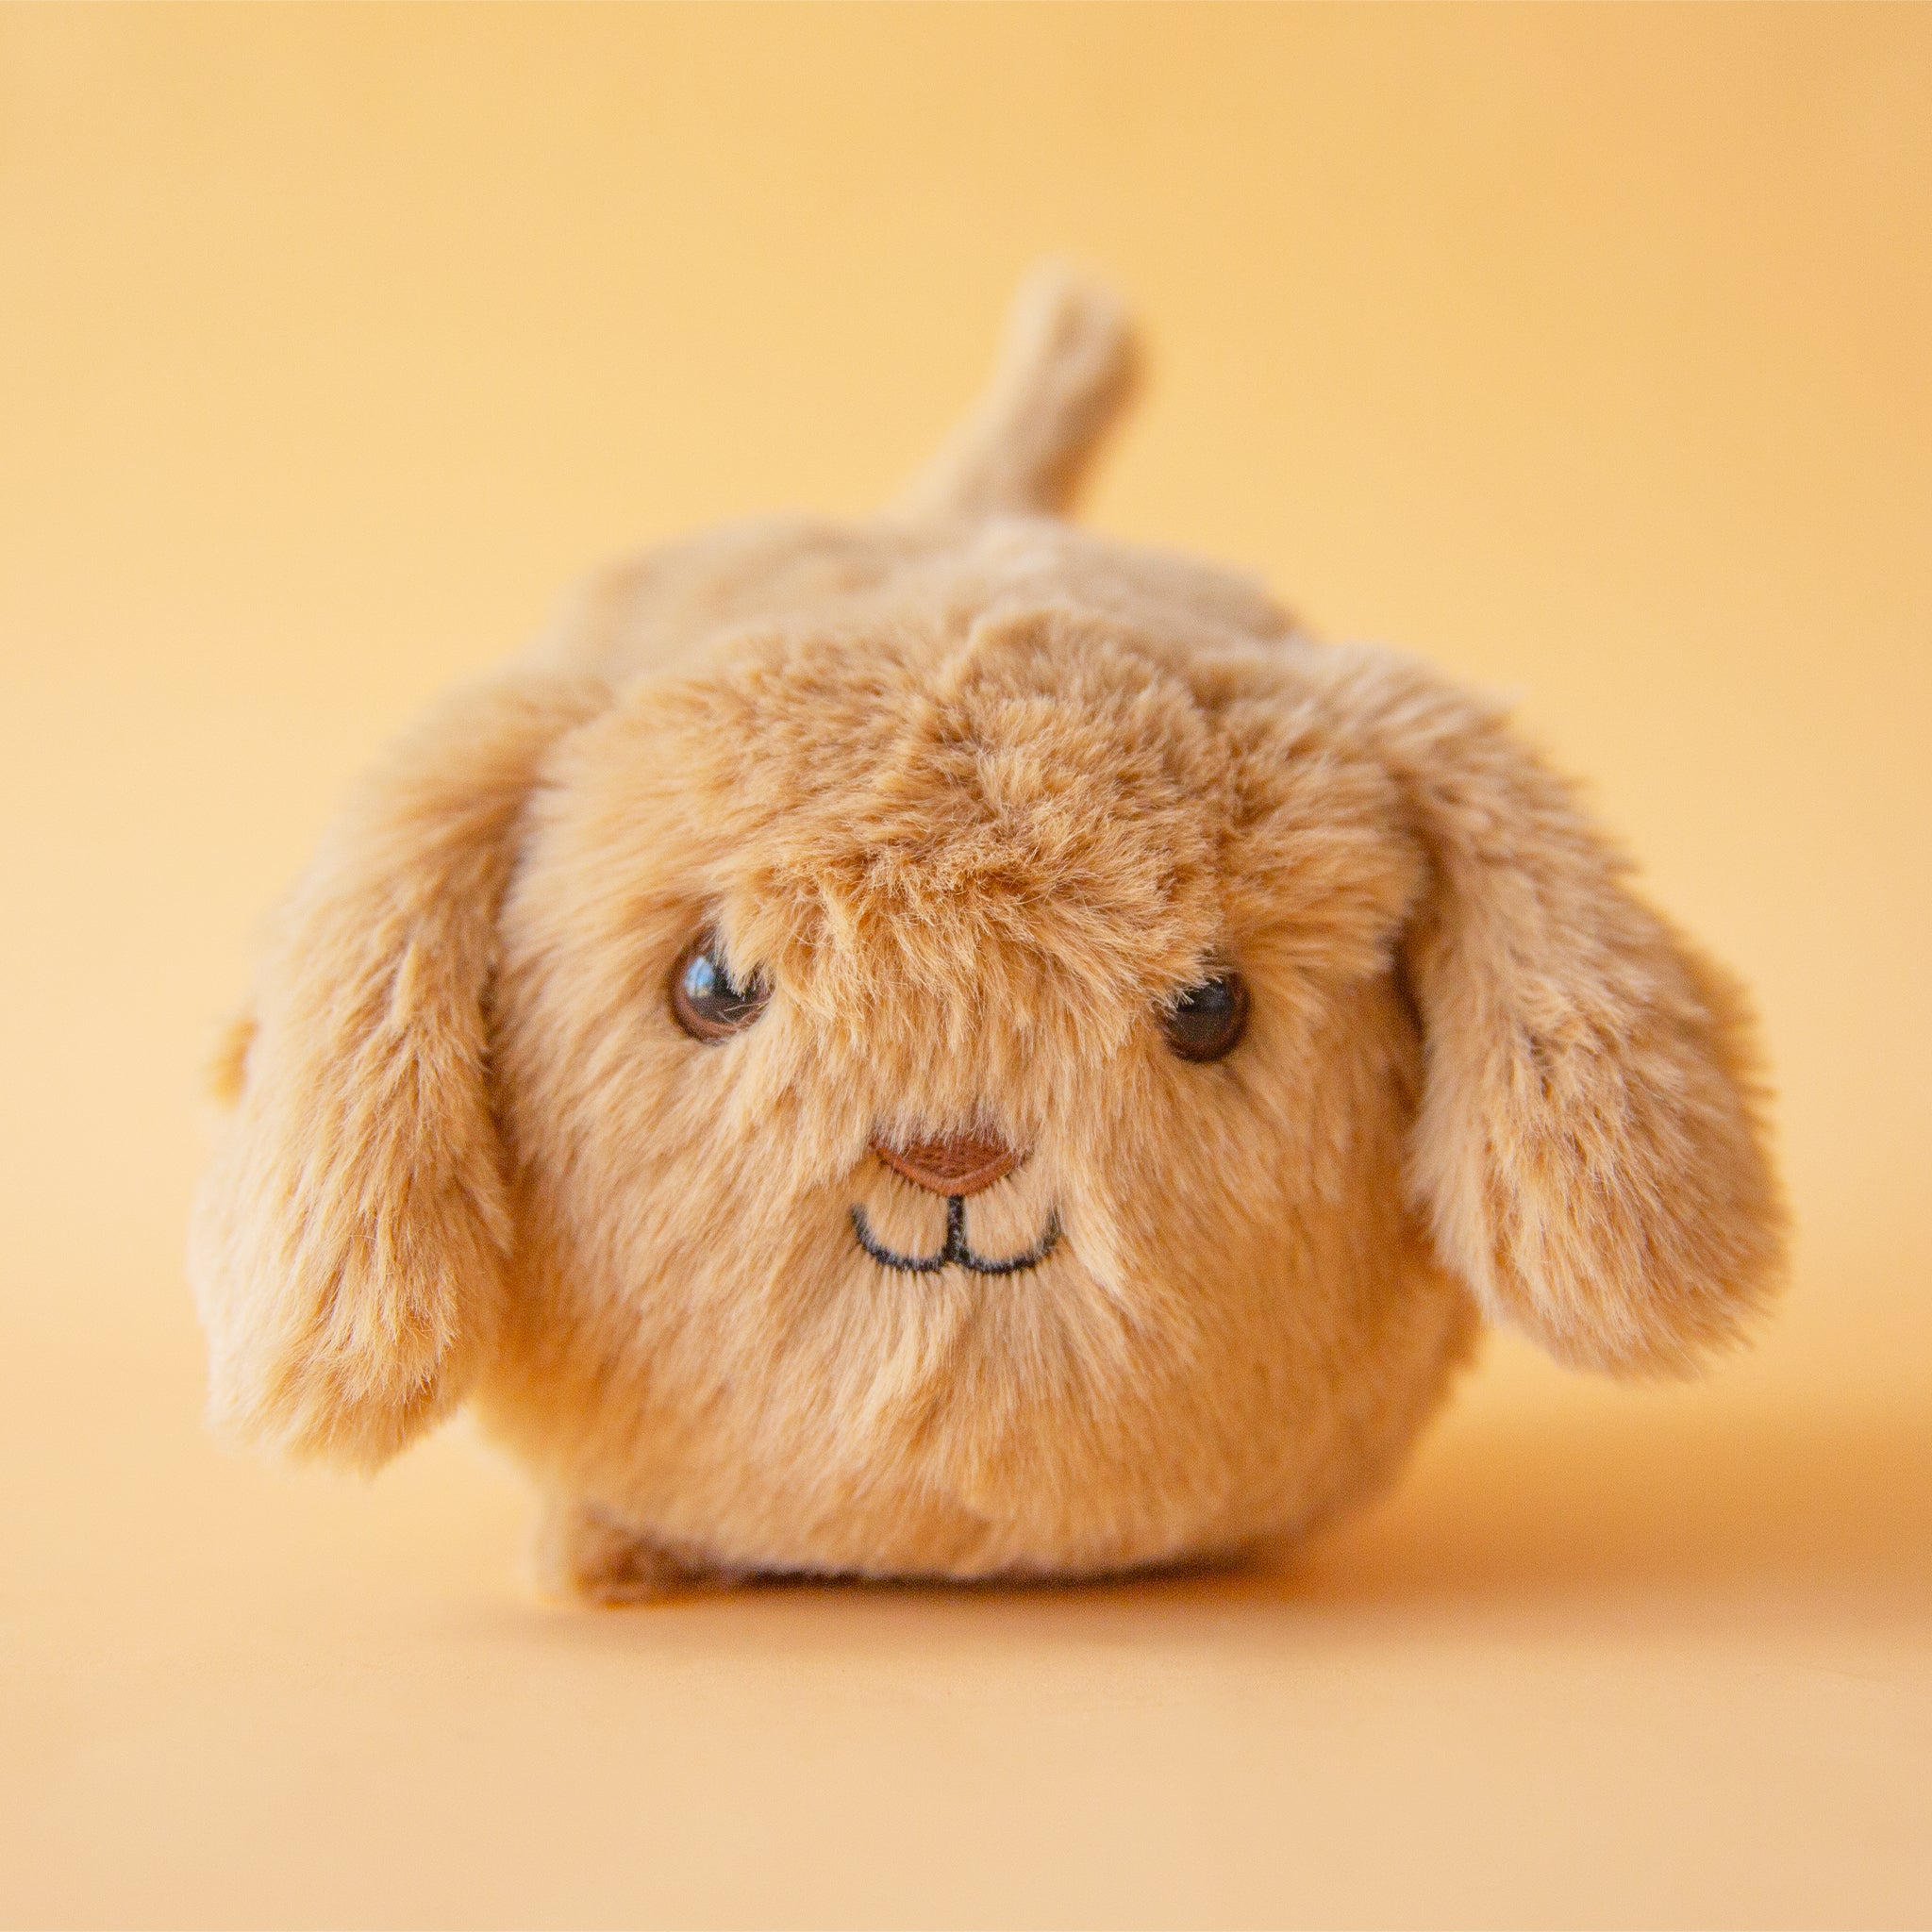 On a tan background is a tan puppy stuffed toy puppy with a round body and floppy ears.